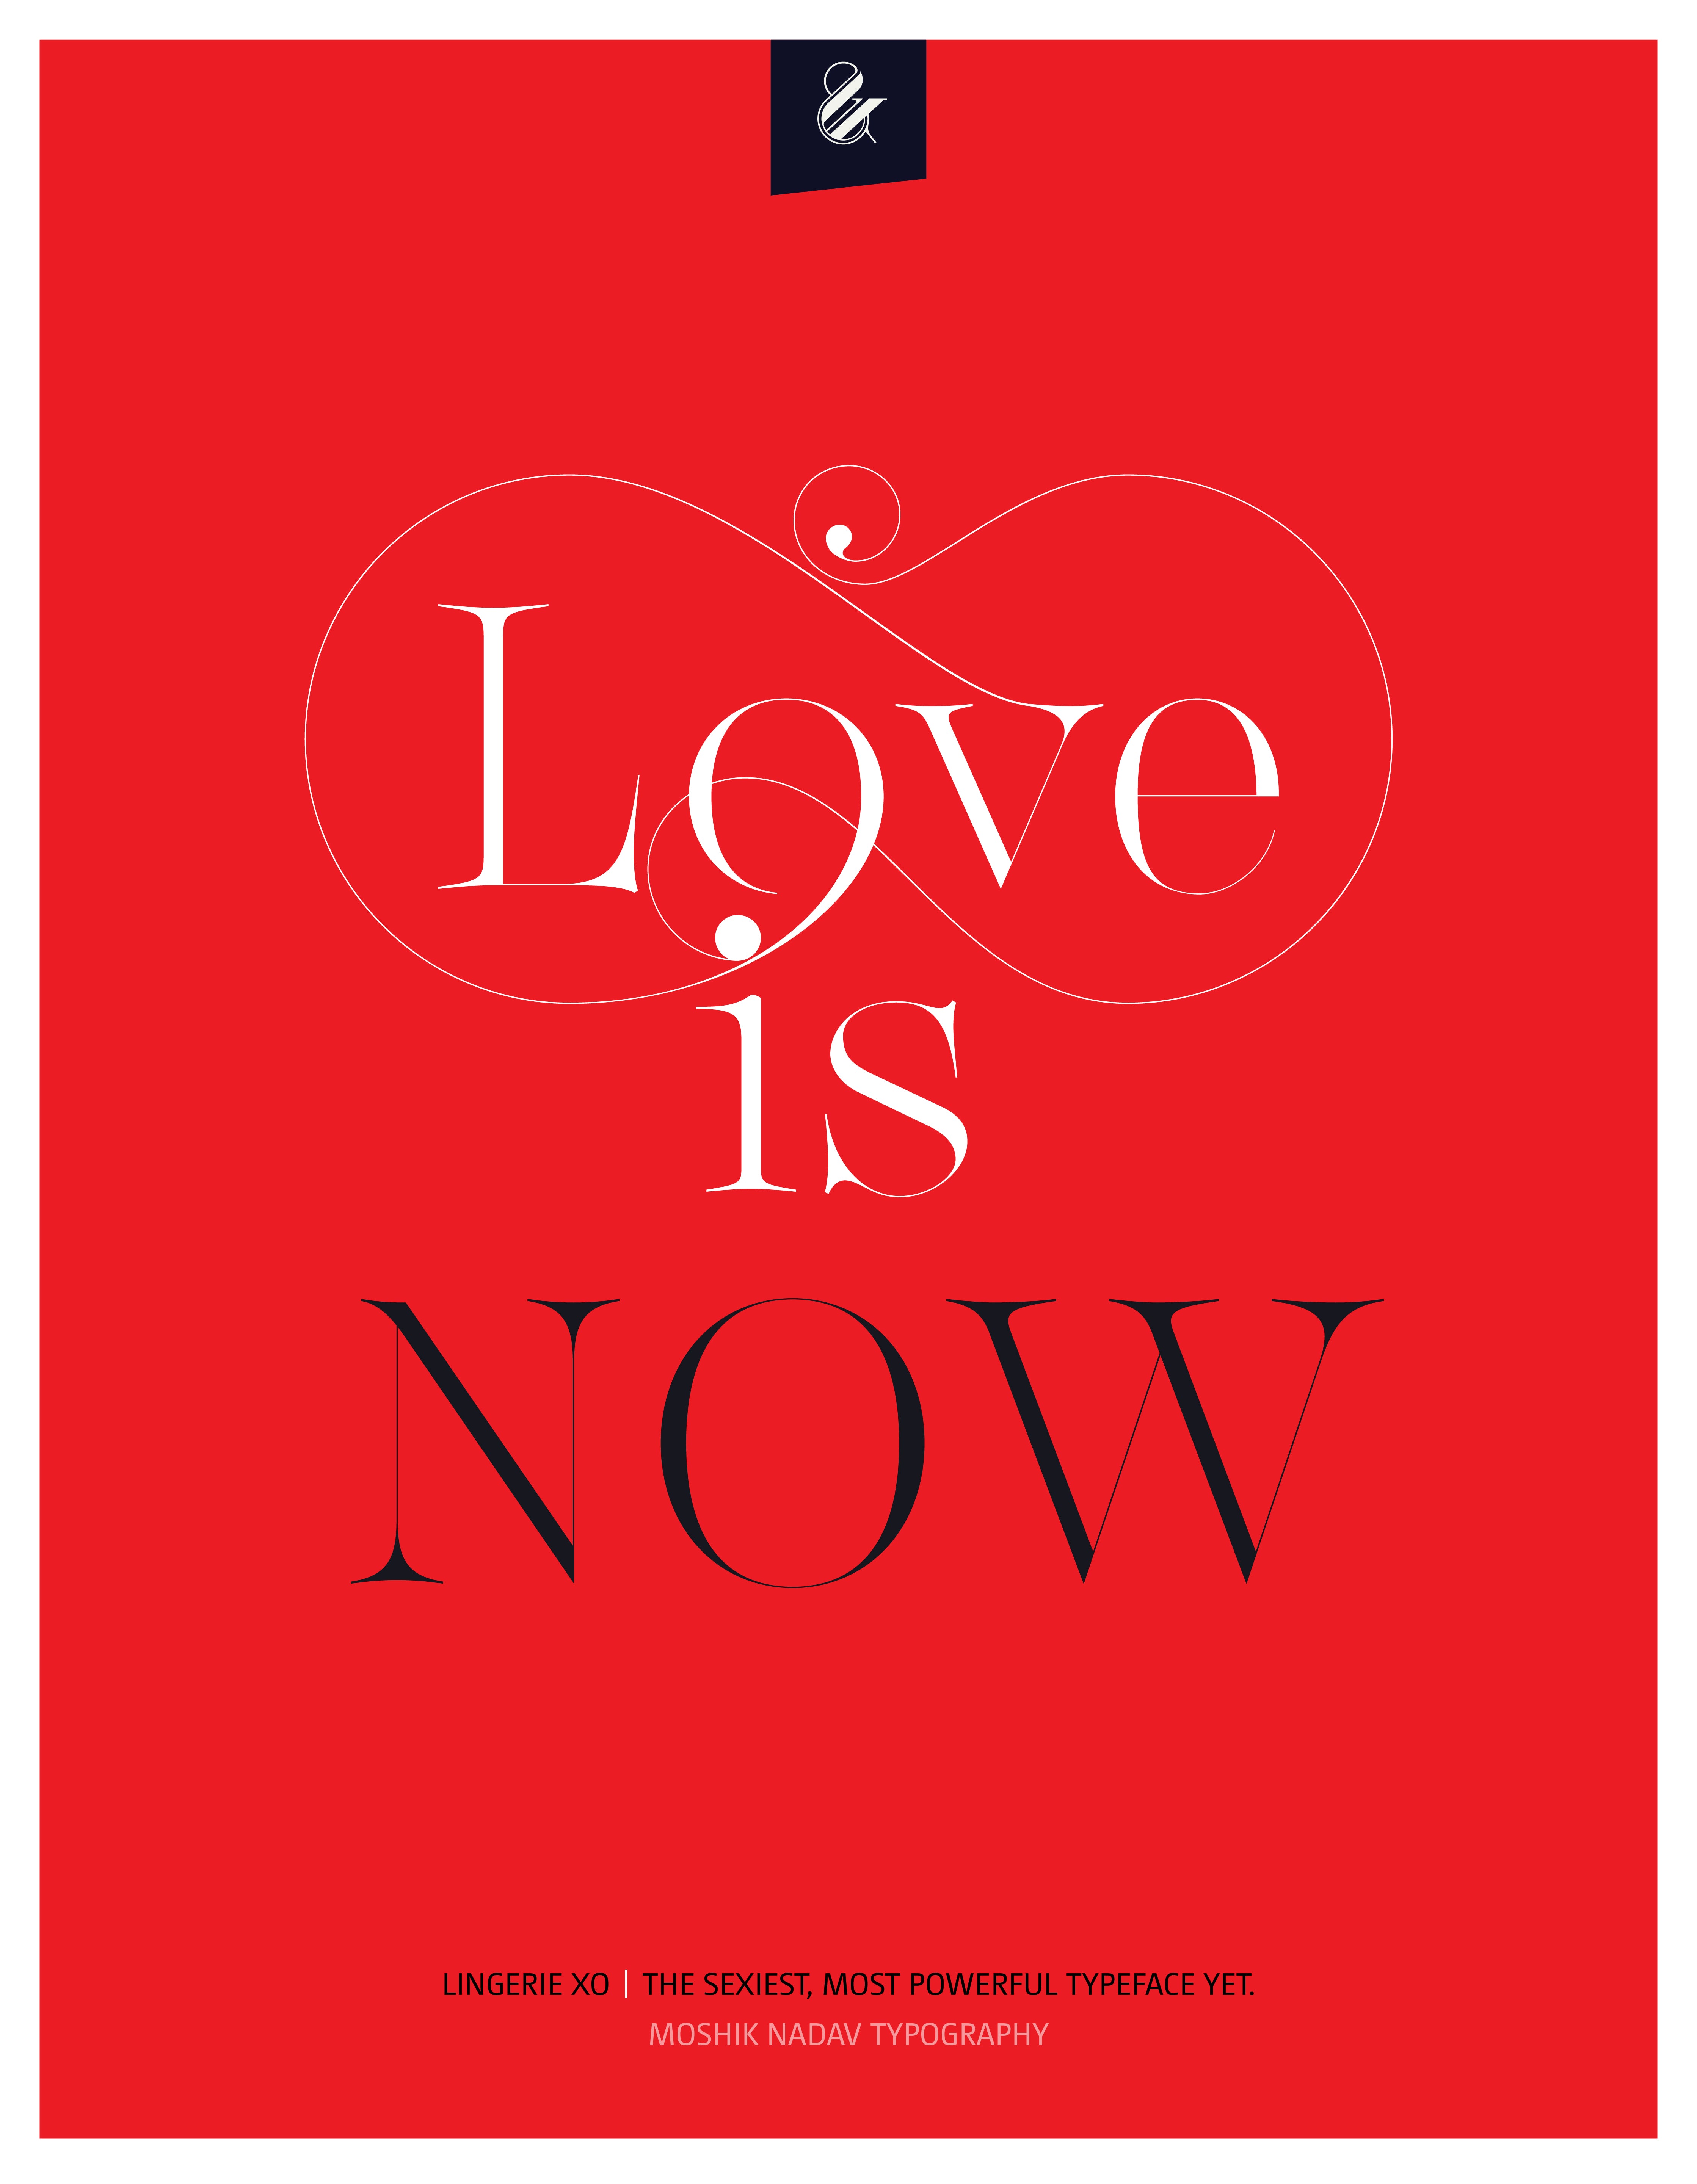 Love is now poster - Designed with the sexy font Lingerie XO by Moshik Nadav Fashion Typography NYC